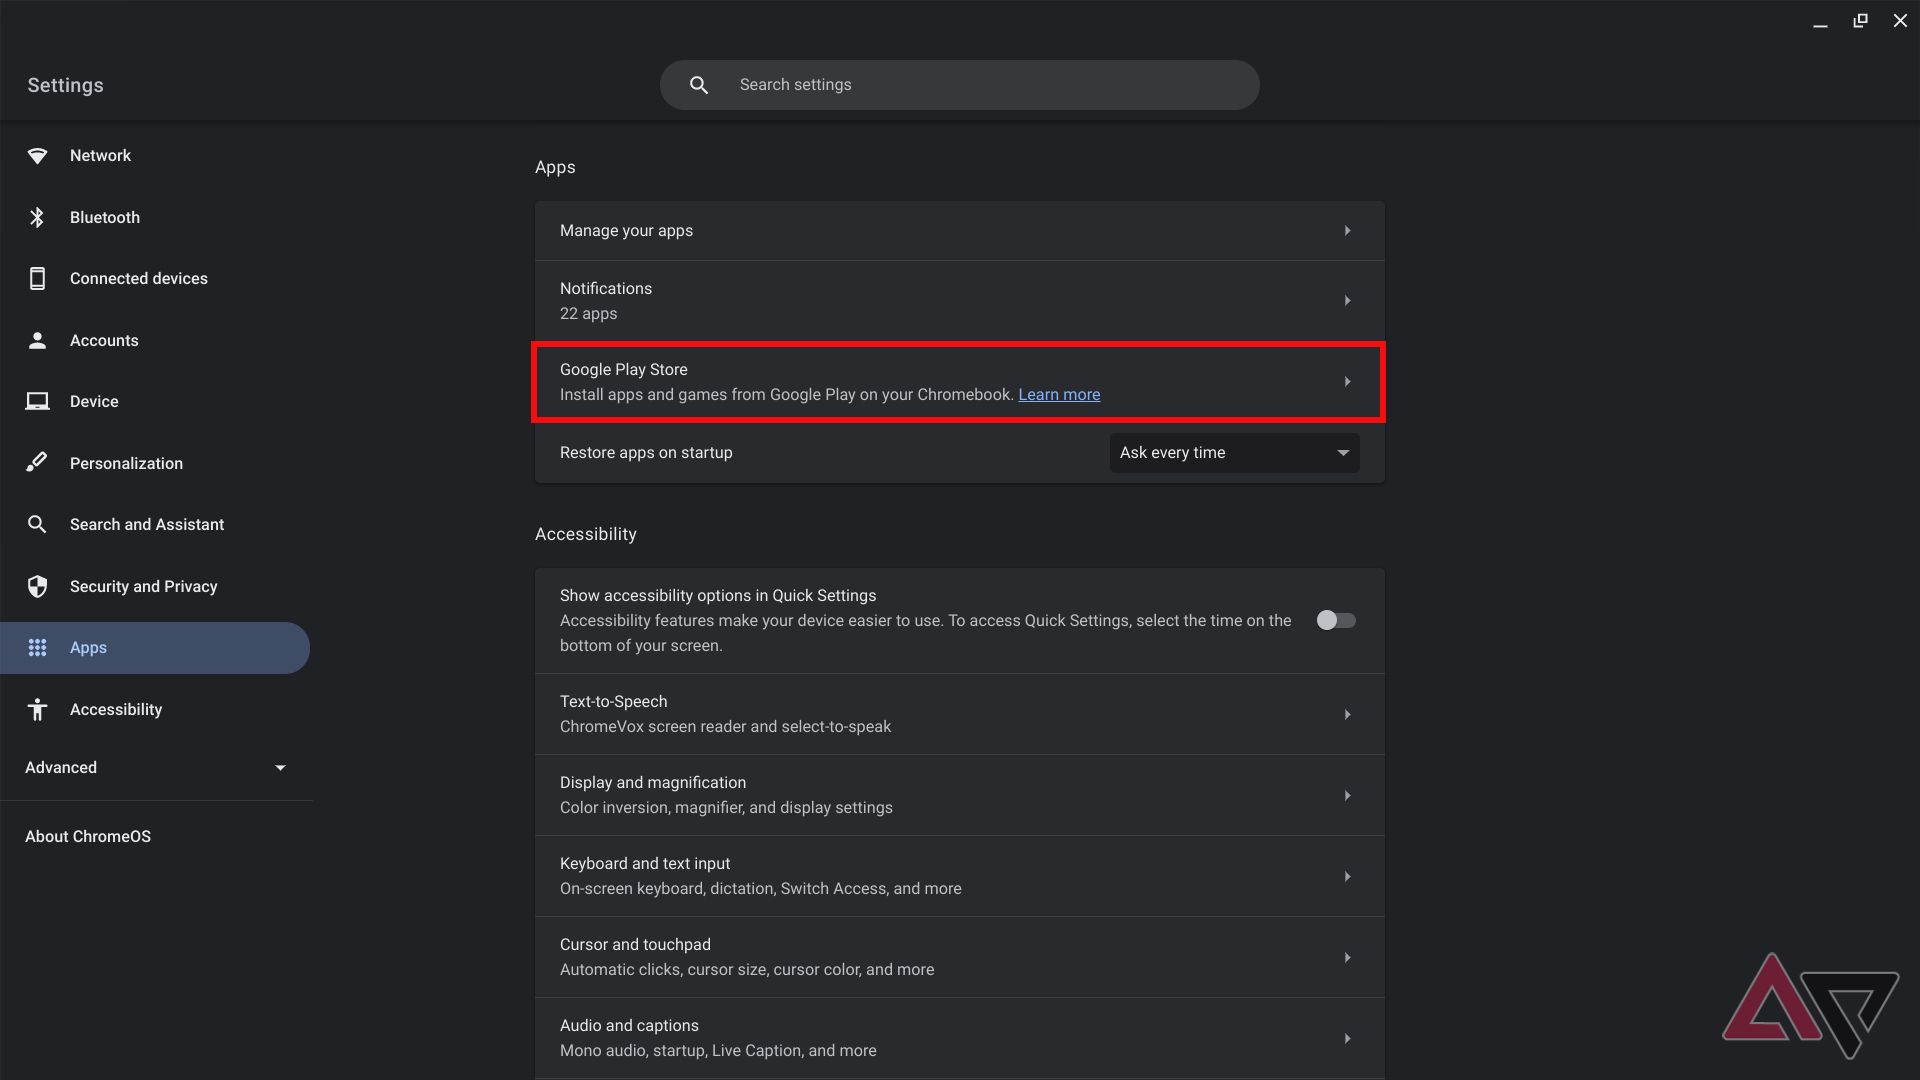 A screenshot of the ChromeOS Settings page with the Google Play Store option highlighted 